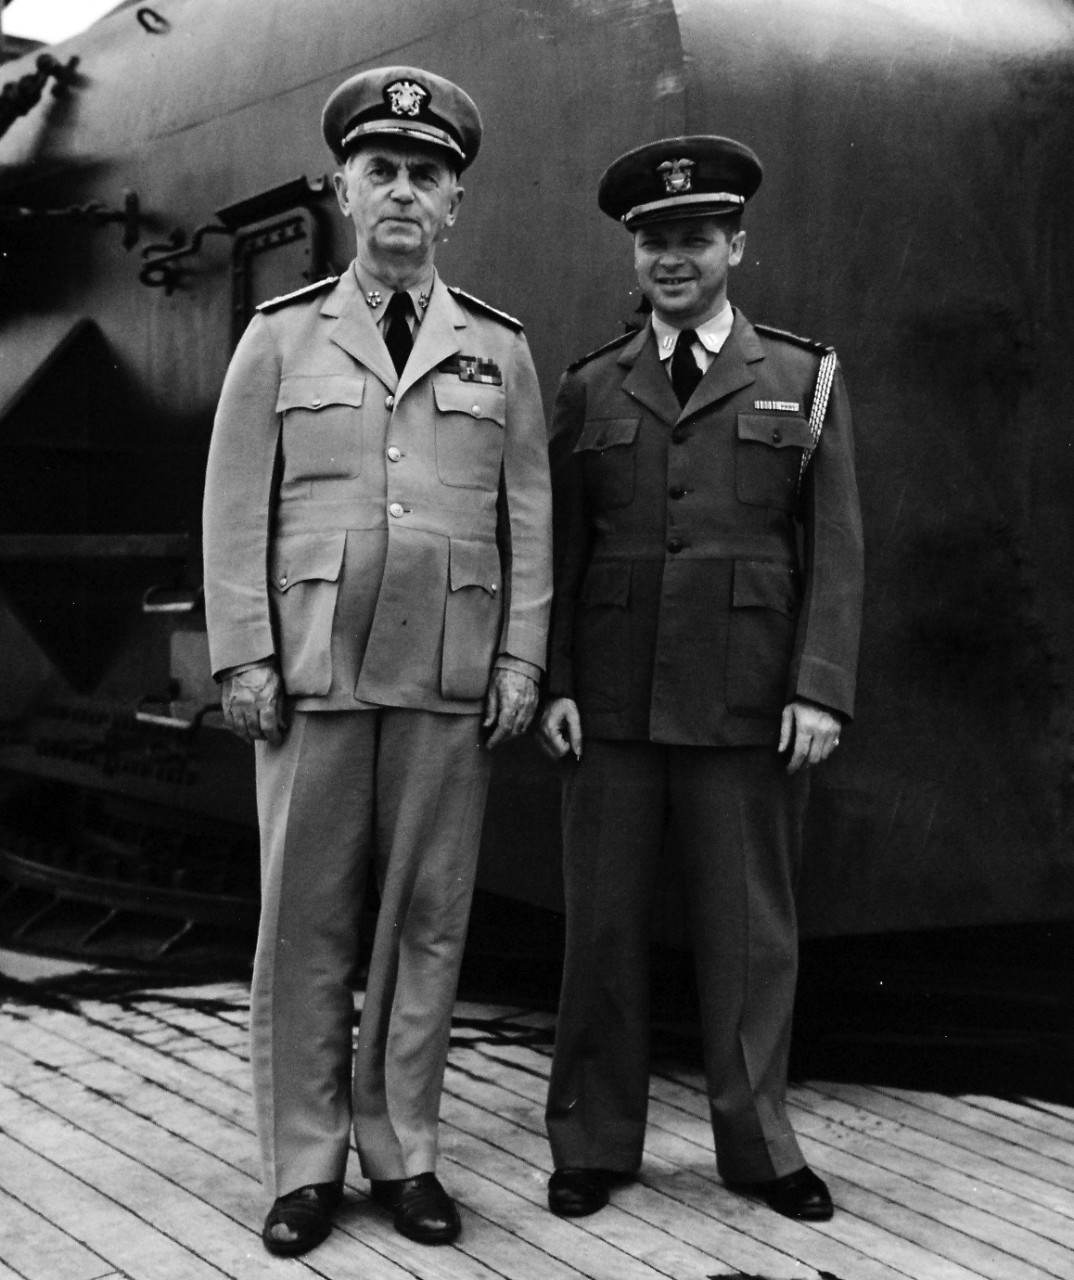 80-G-700368:  Potsdam Conference, July-August 1945.   Fleet Admiral William D. Leahy and Lieutenant Eddlestein.  Photograph released:  August 1945.  Official U.S. Navy photograph, now in the collections of the National Archives.  (2016/06/28).